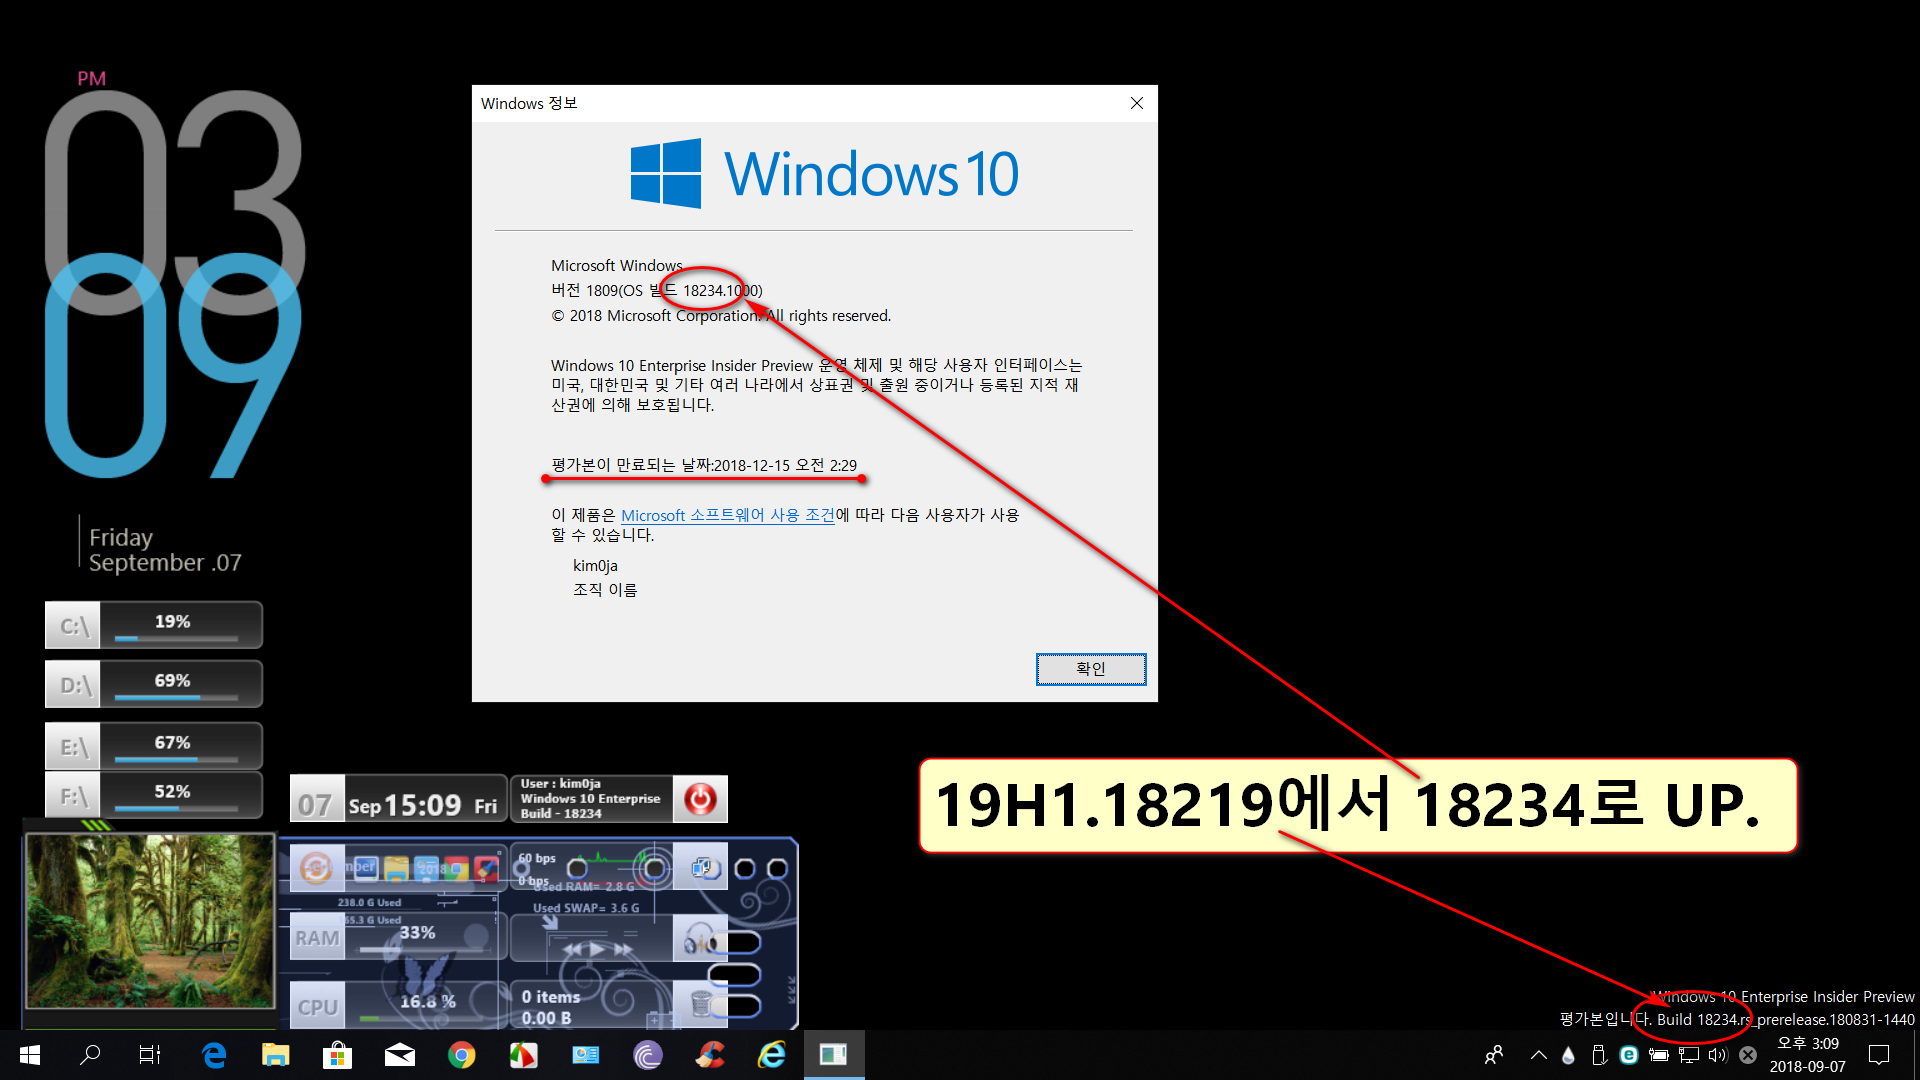 03-19H1.Windows 10 Insider Preview 18234.1000 (rs_prerelease)로 UPGRADE 중임.png